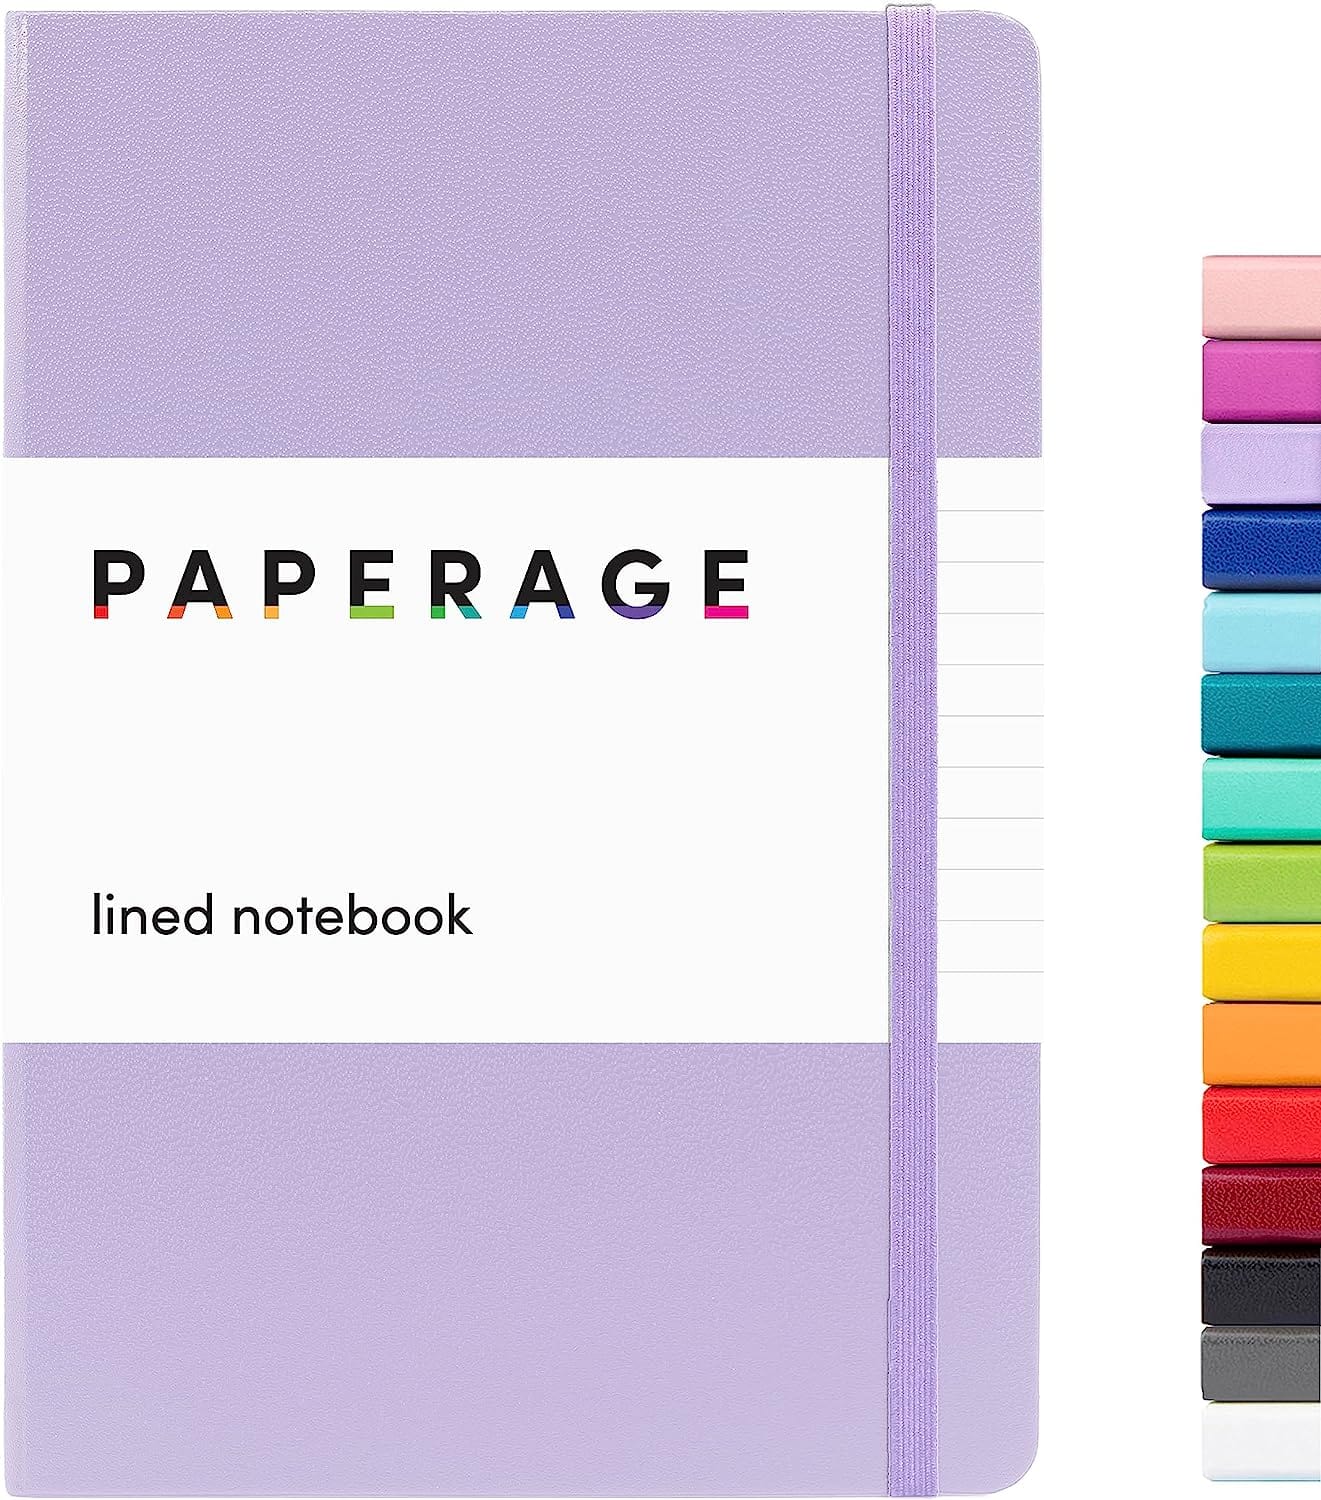 Paperage Lined Notebook in Lavender